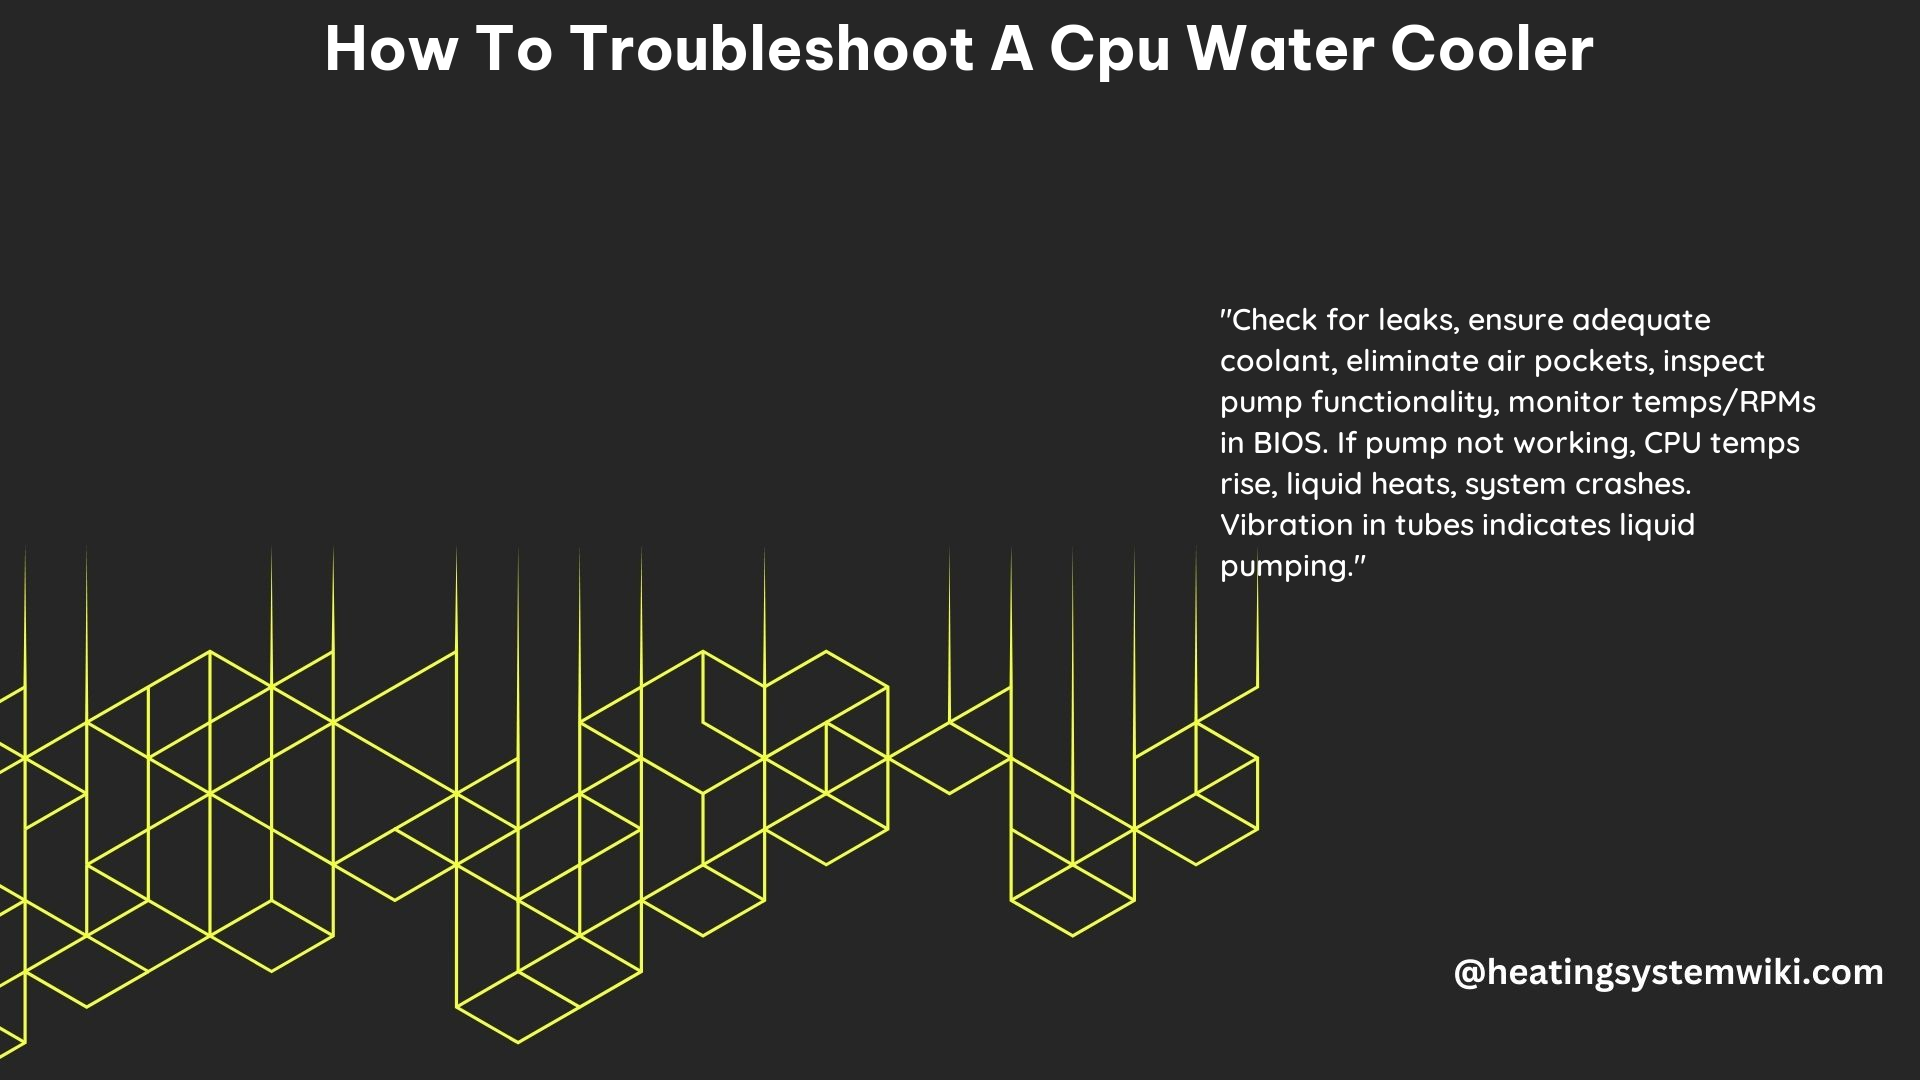 How to Troubleshoot a CPU Water Cooler